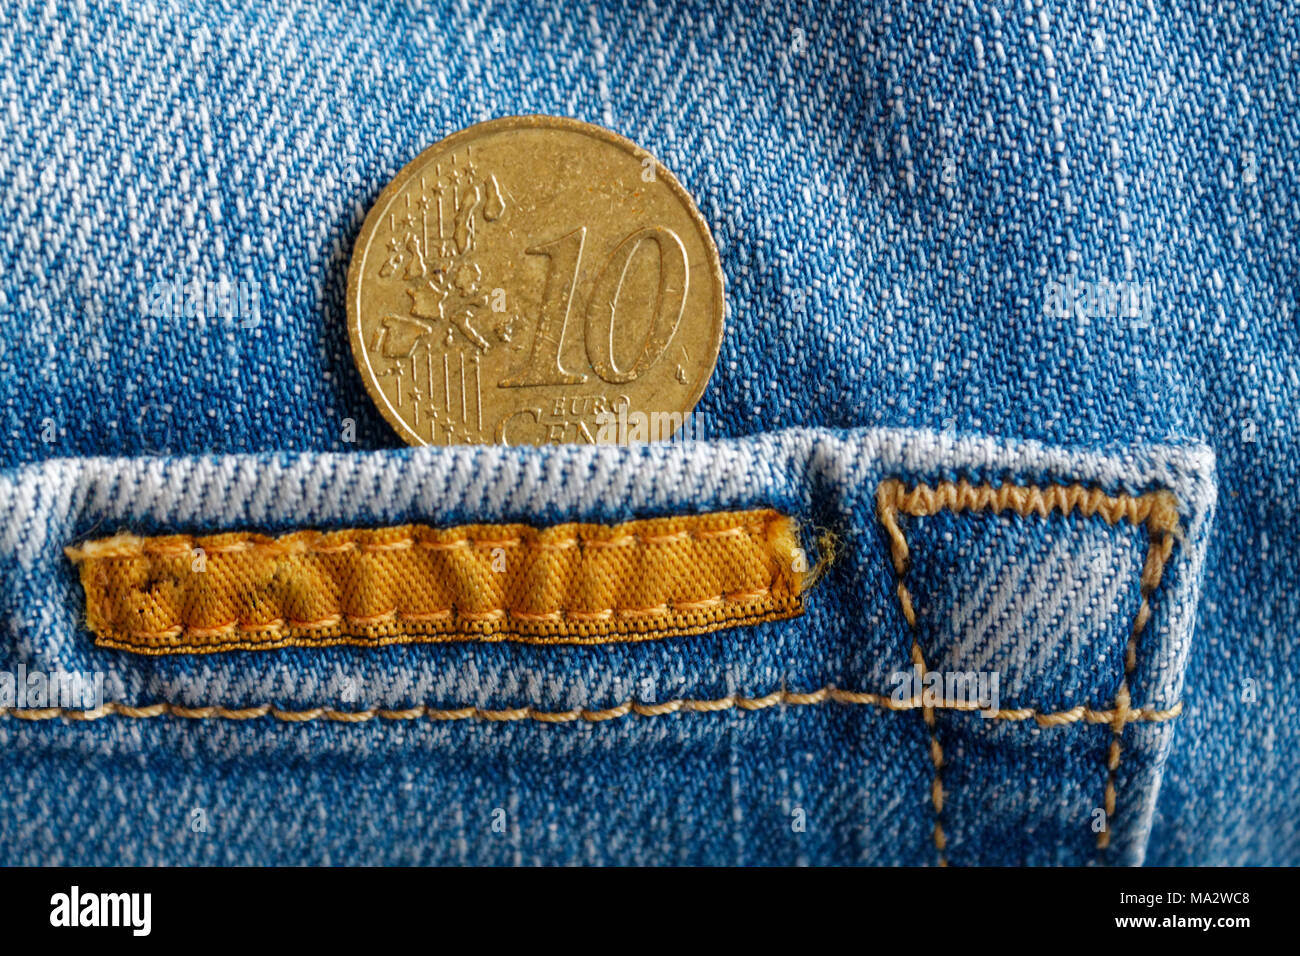 Euro coin with a denomination of 10 euro cent in the pocket of worn blue denim  jeans with orange laces Stock Photo - Alamy